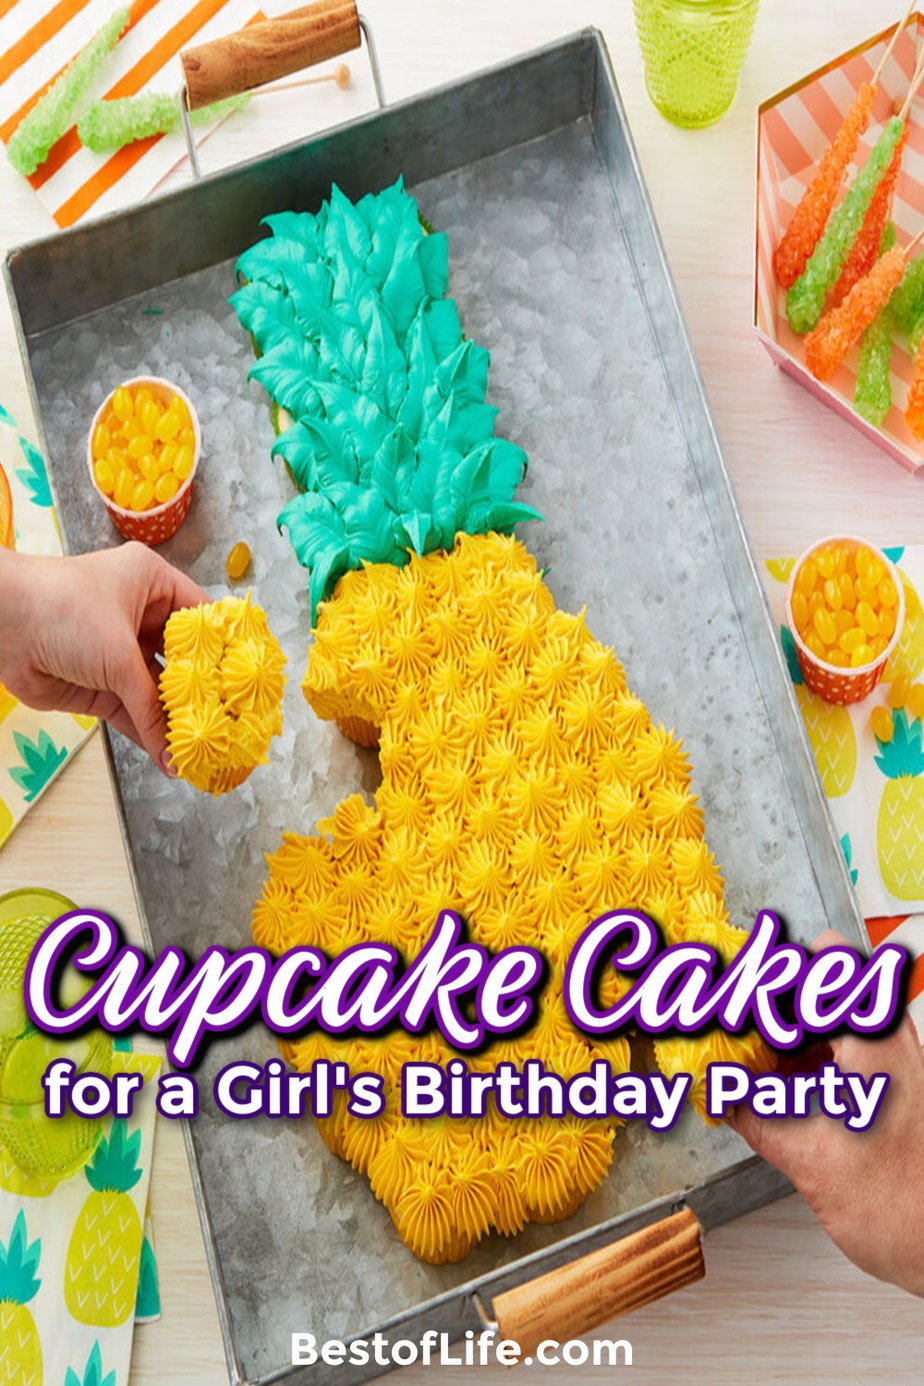 These are some of the best pull-apart cupcake cake ideas for a girl’s birthday party that are not only easy party recipes but impressive as well. Birthday Cake Ideas for Girls | Teen Birthday Party Ideas | Party Food Ideas | Cupcake Cakes | Cupcake Cake Decorating | Cake Recipes for Girls | Birthday Cake for Girls Kids | Recipes for Birthday Parties #cupcakecake #birthday via @thebestoflife